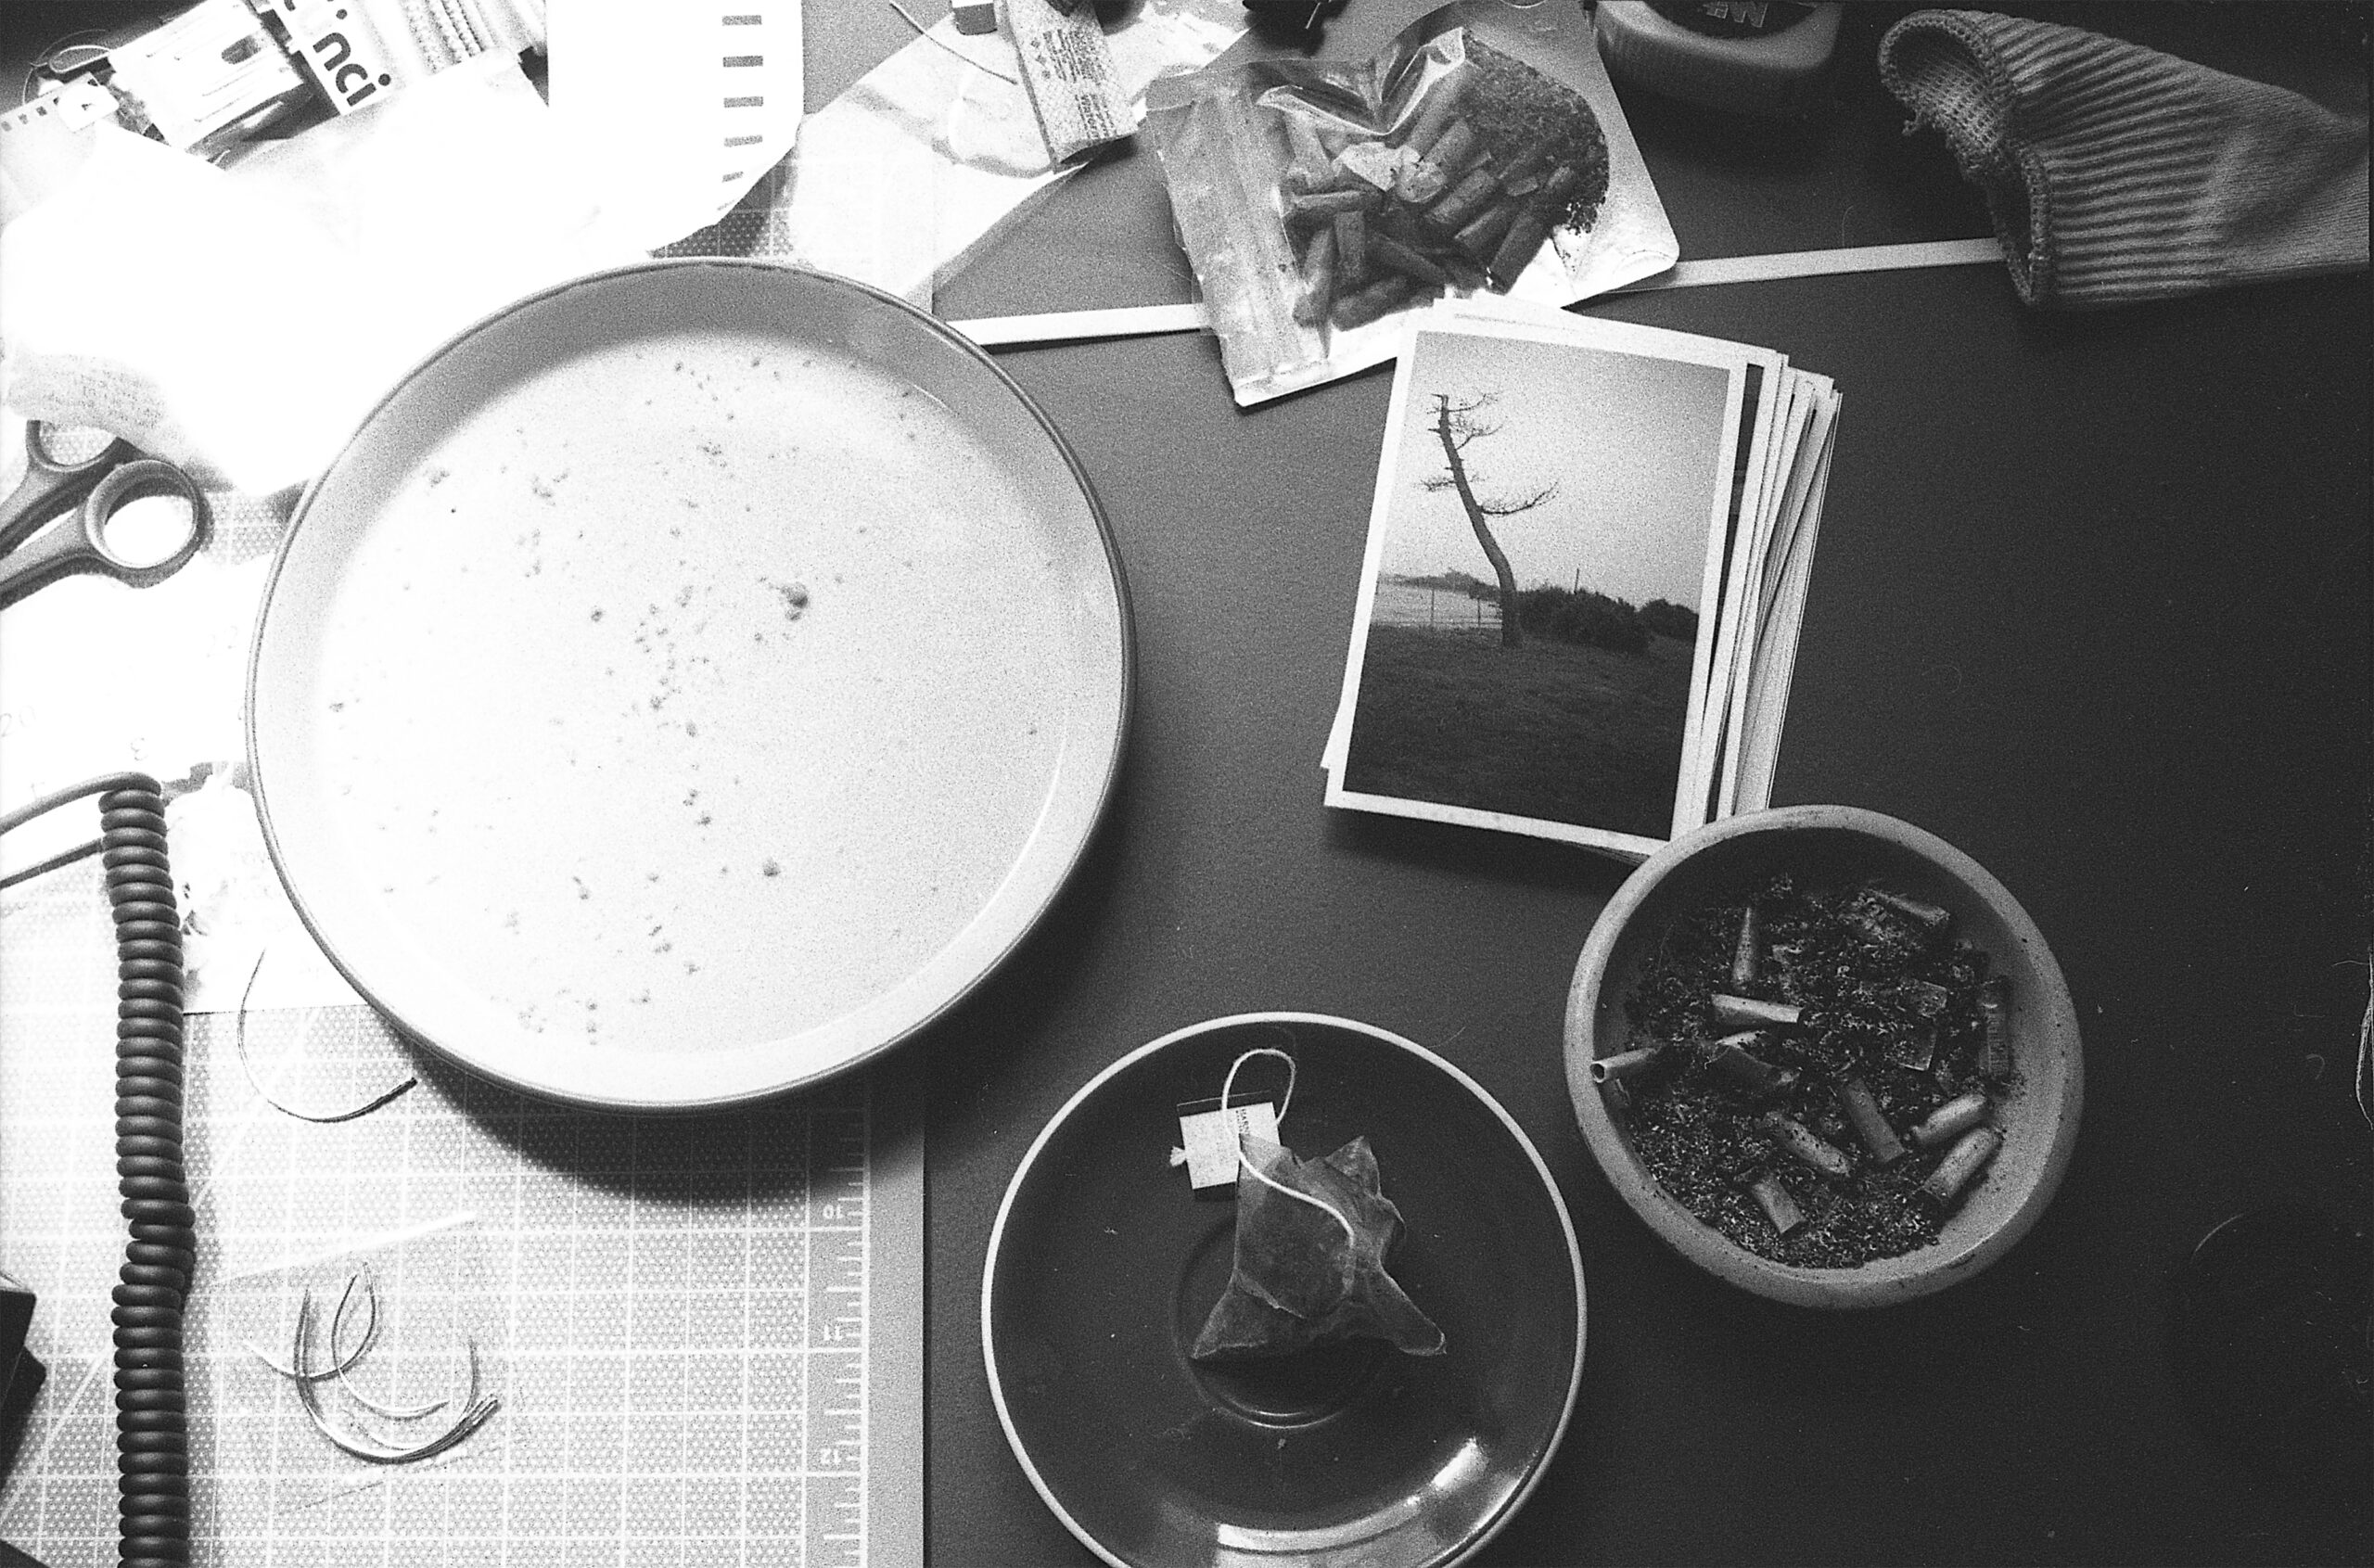 Black and white overhead photo of desktop with empty plate, used teabag, ashtray, photographs, and phone cord.